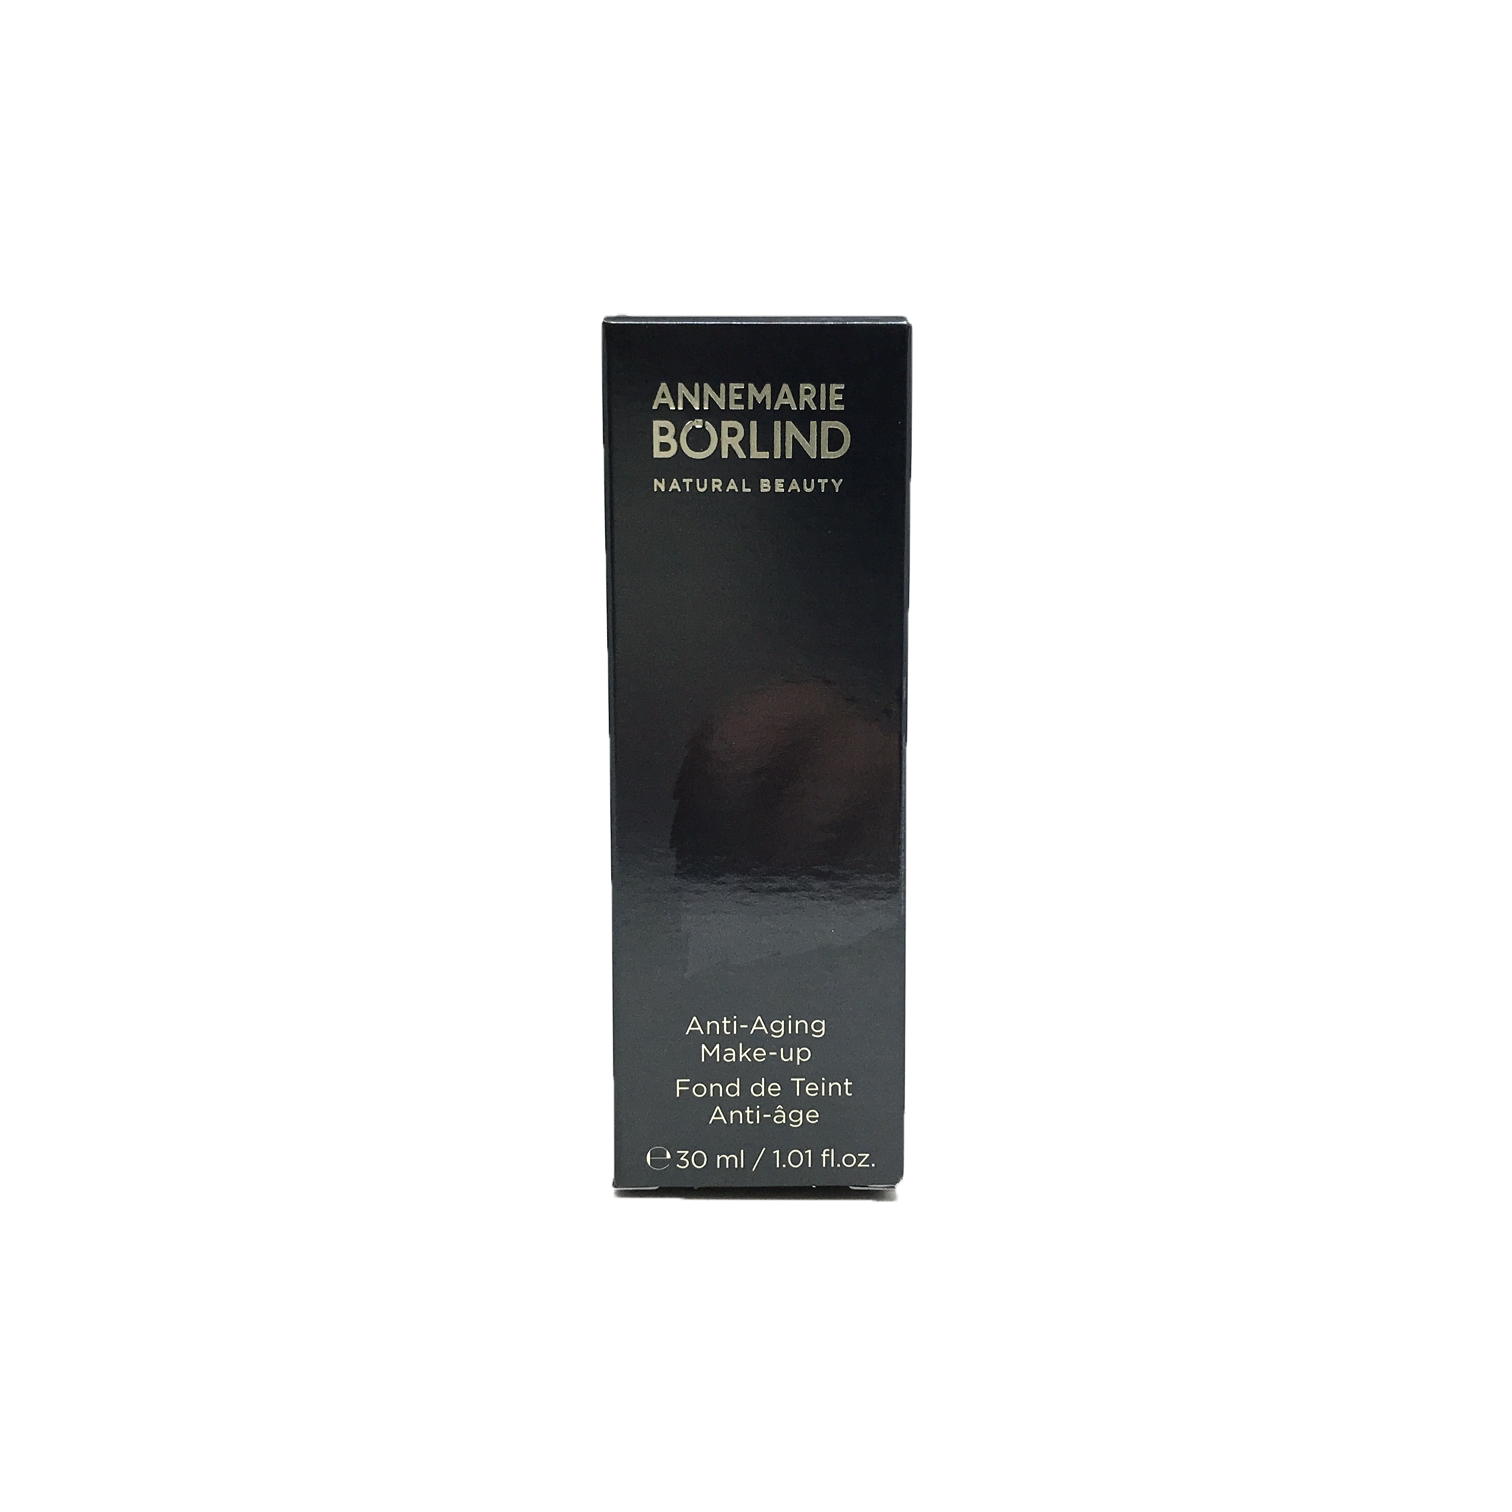 Annemarie Borlind Anti-Aging Make-up Almond 30ml (Discontinued- Replacement Coming Soon)